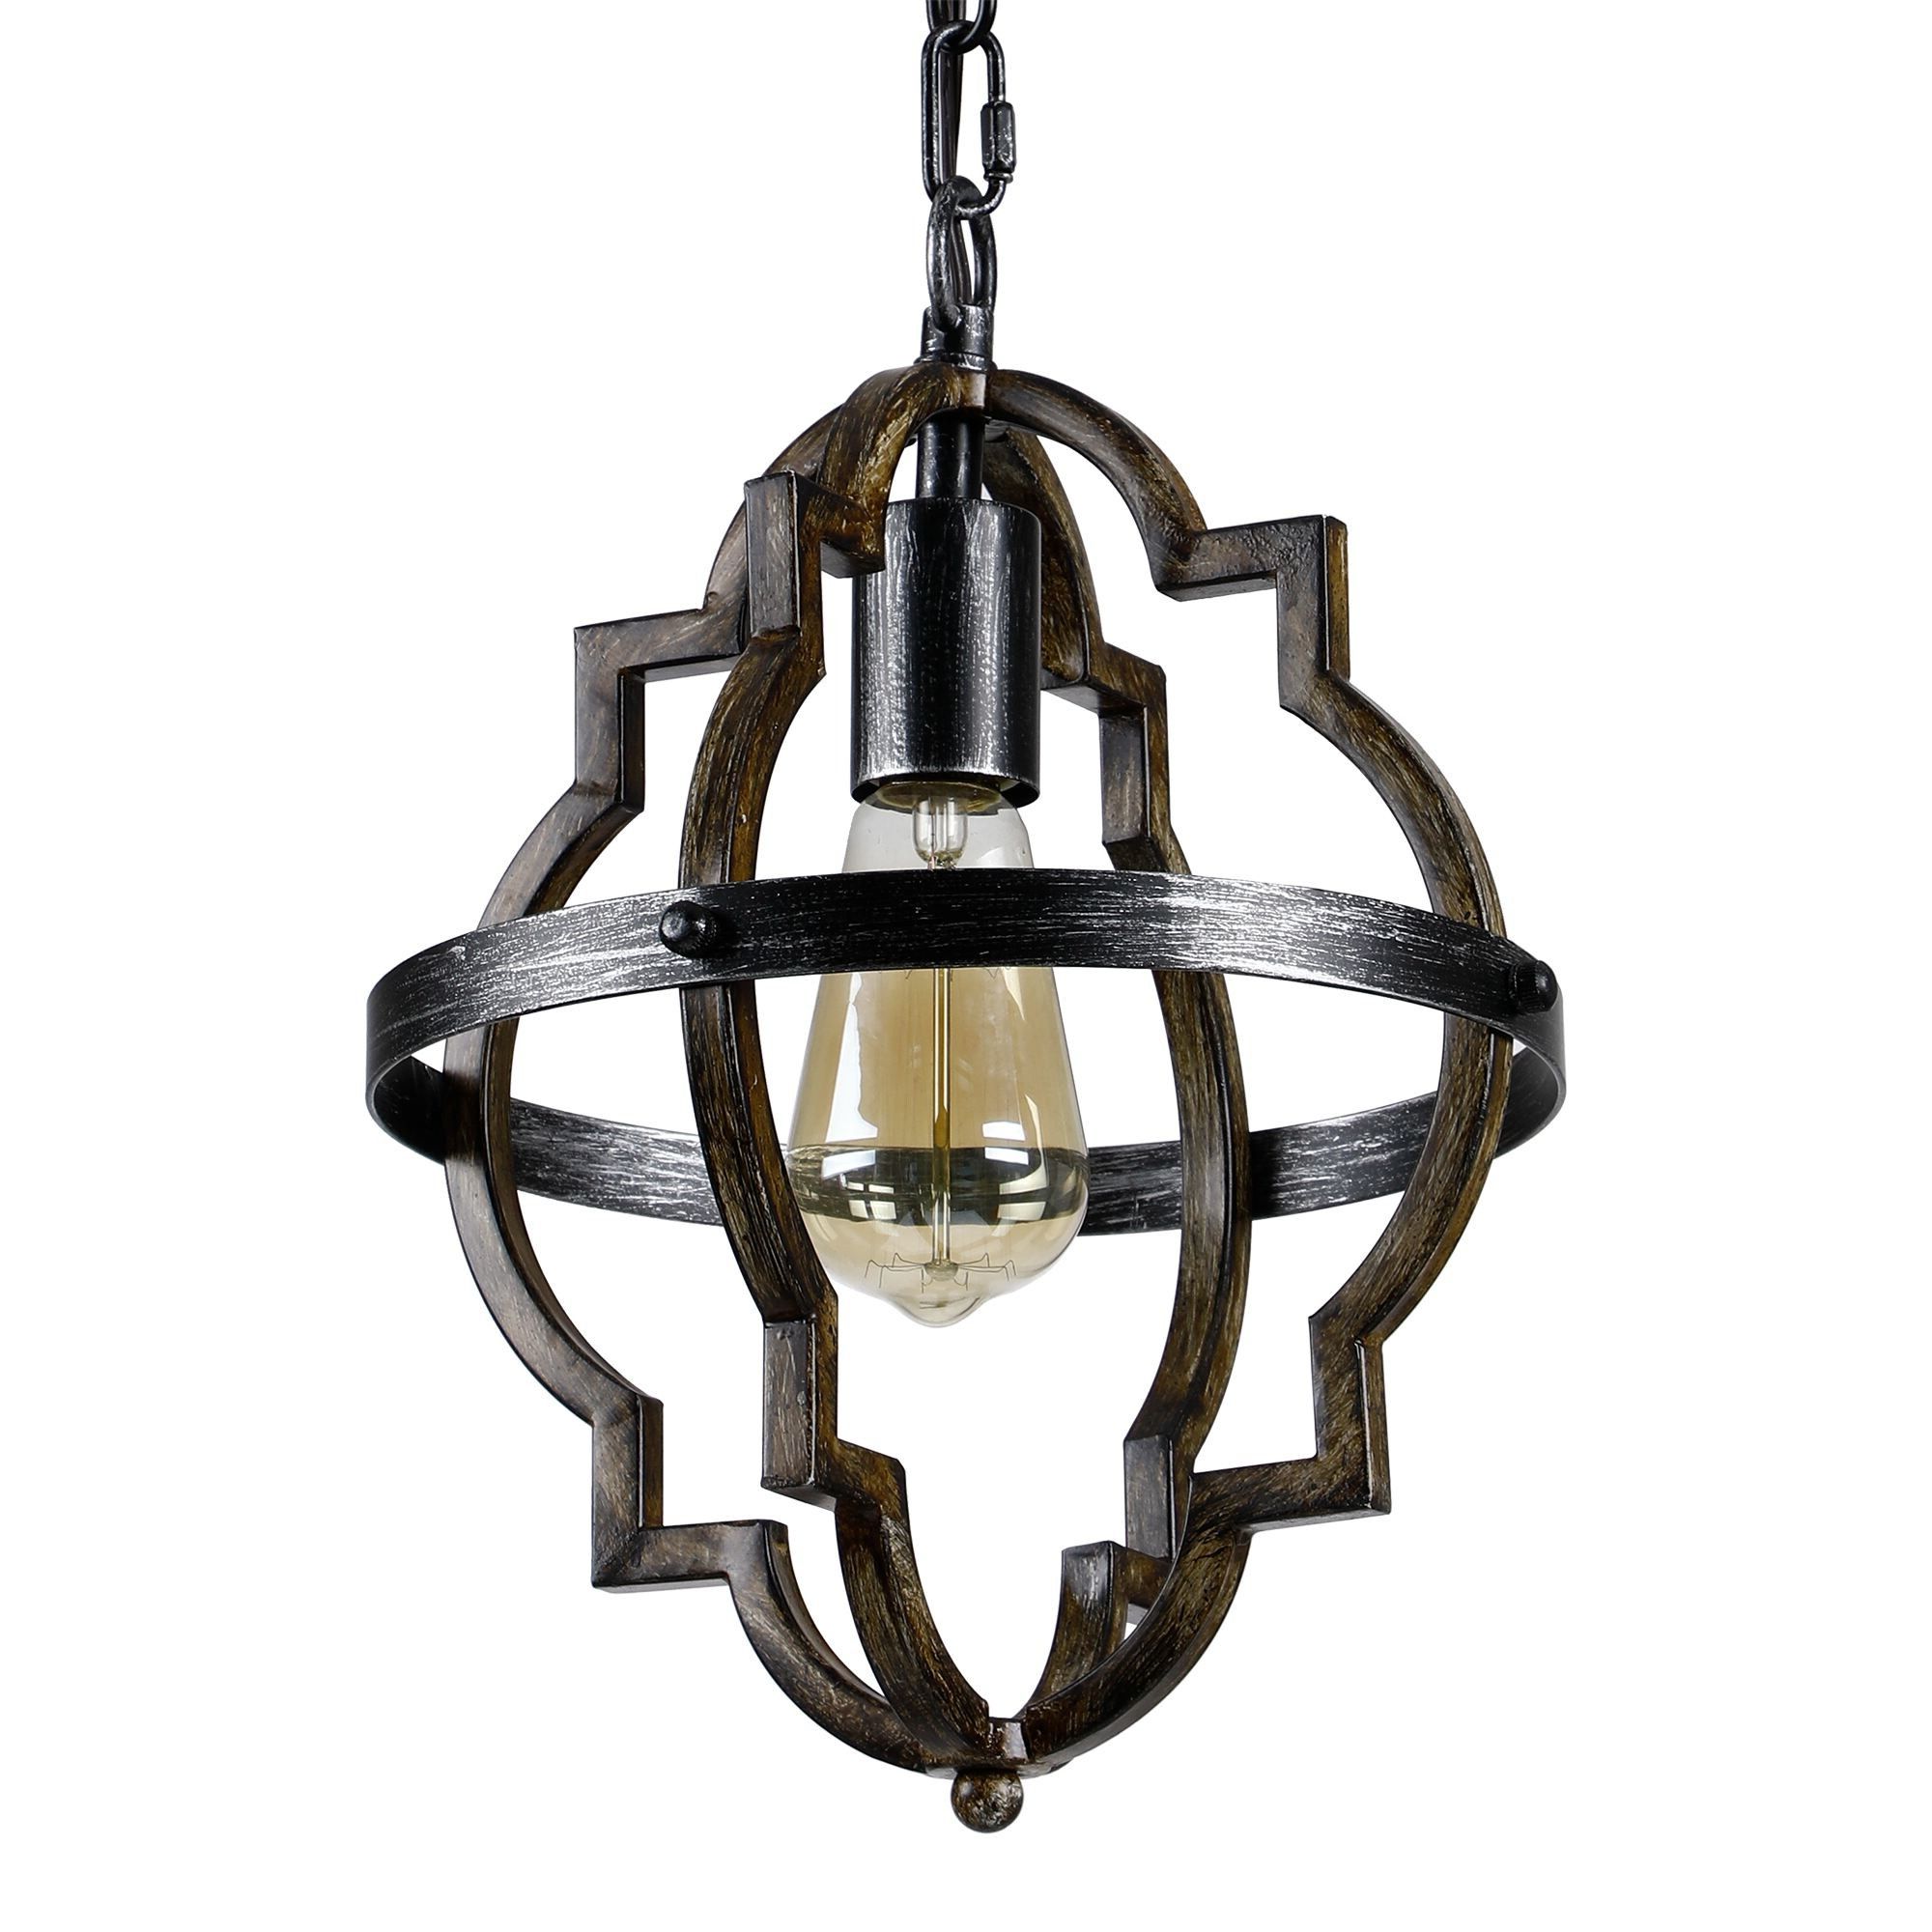 Parrot Uncle Distressed Black And Brushed Wood Farmhouse Lantern Pendant  Light In The Pendant Lighting Department At Lowes With Regard To Widely Used Distressed Black Lantern Chandeliers (View 12 of 15)